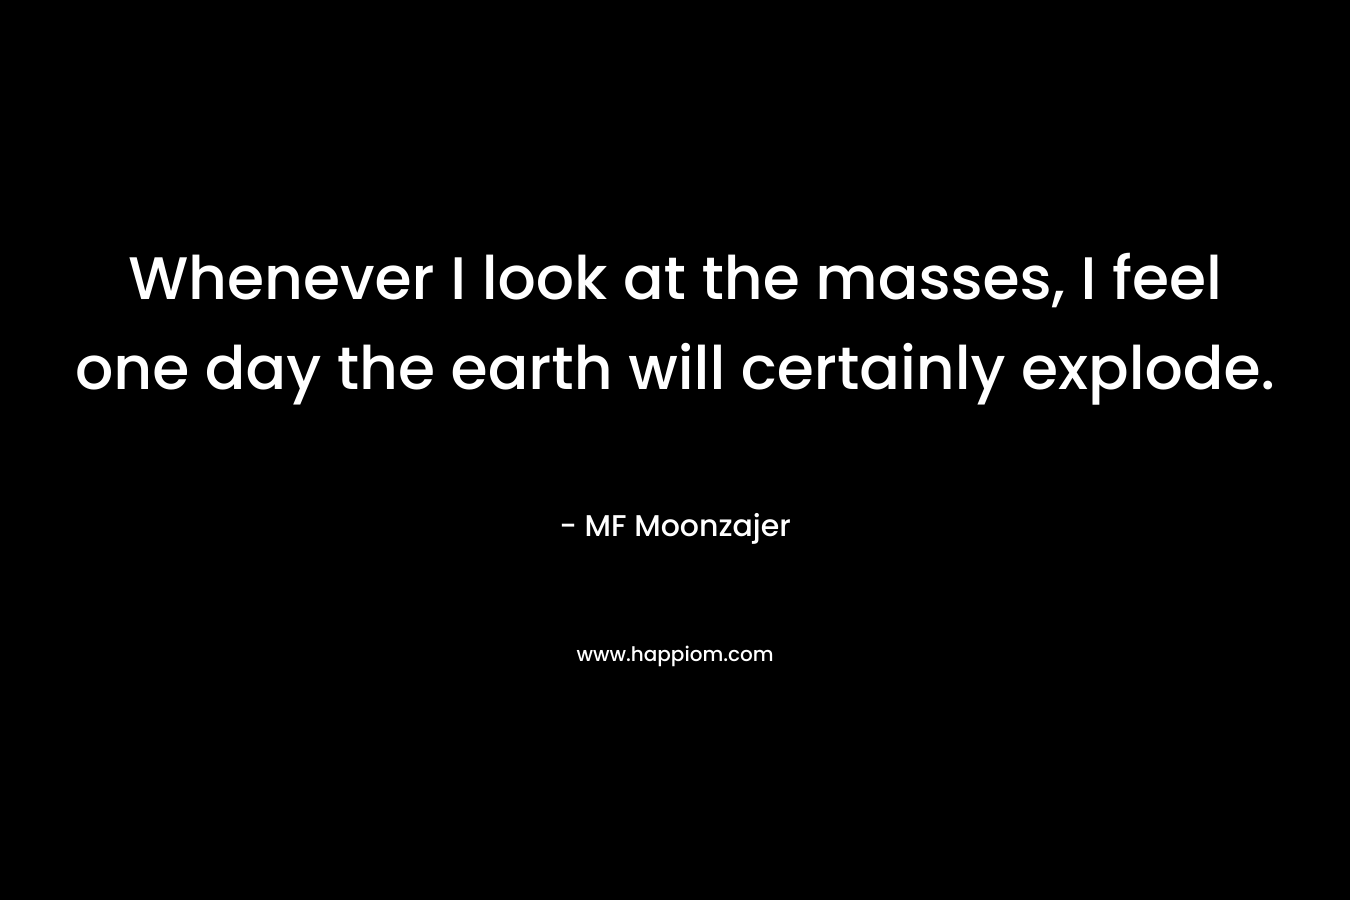 Whenever I look at the masses, I feel one day the earth will certainly explode. – MF Moonzajer